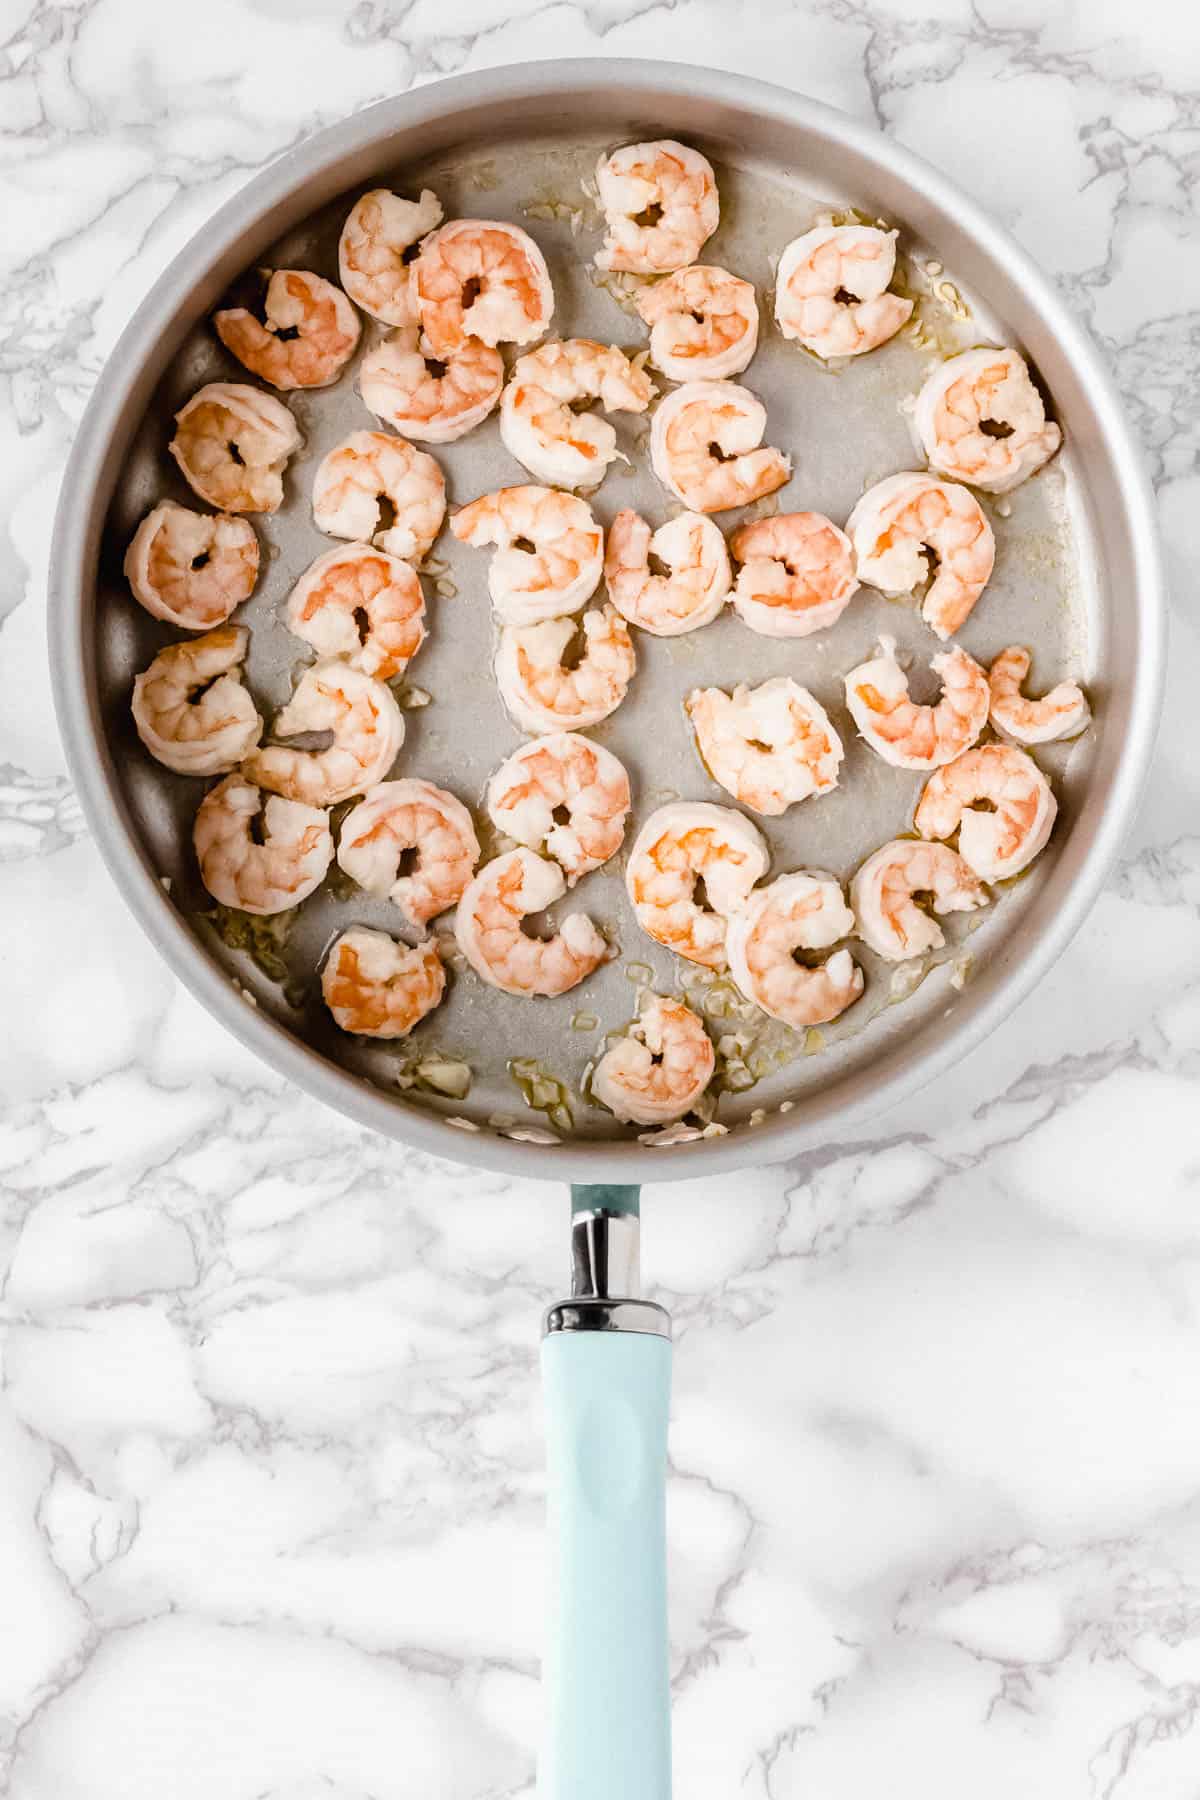 Shrimp cooking in a silver skillet over a marble background